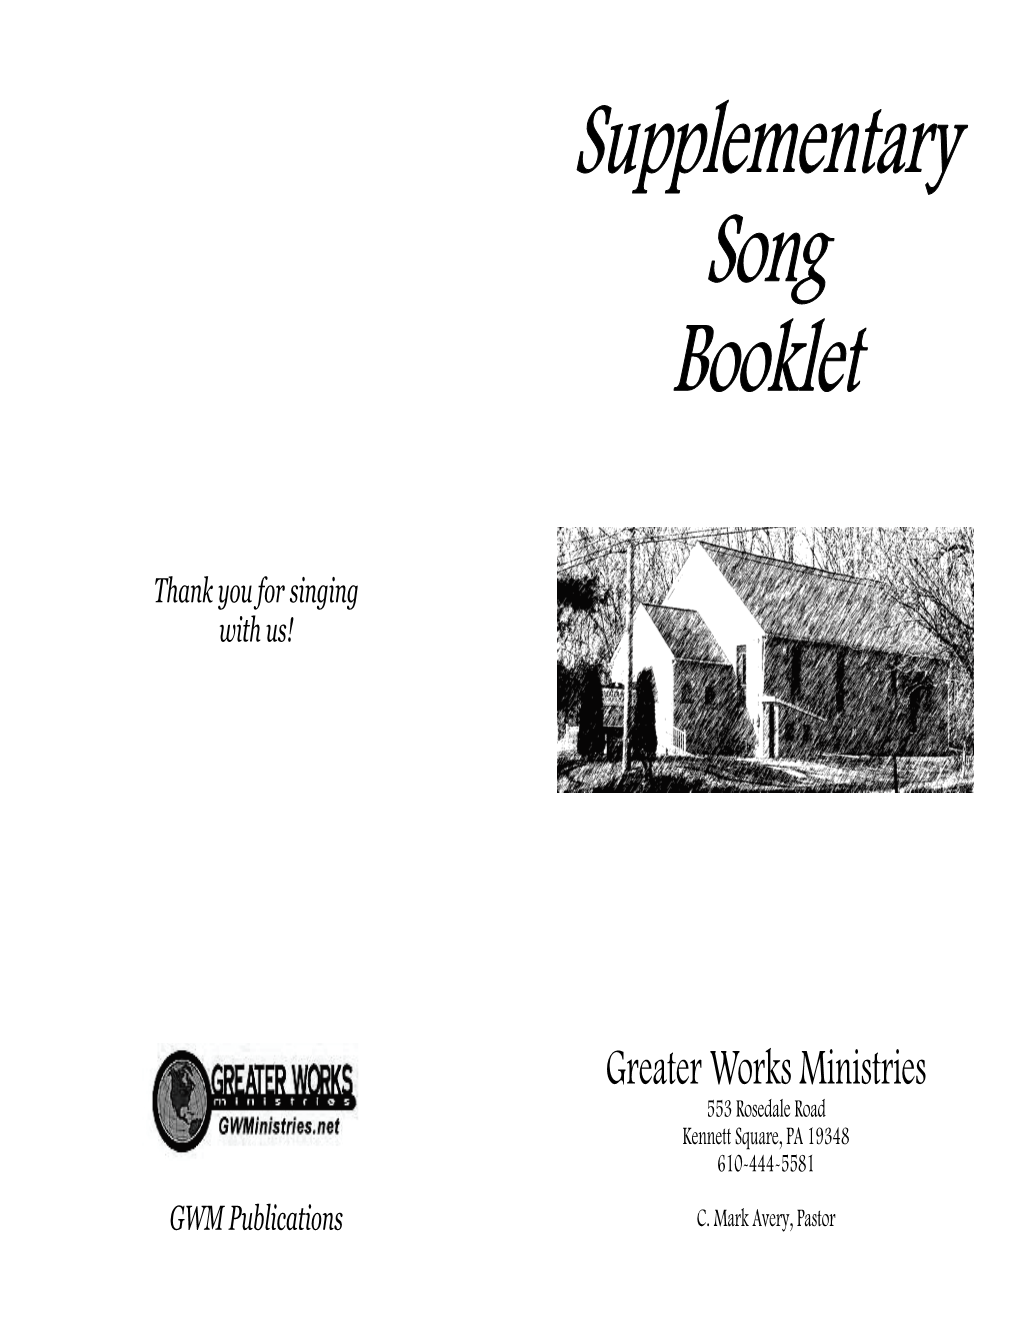 Supplementary Song Booklet